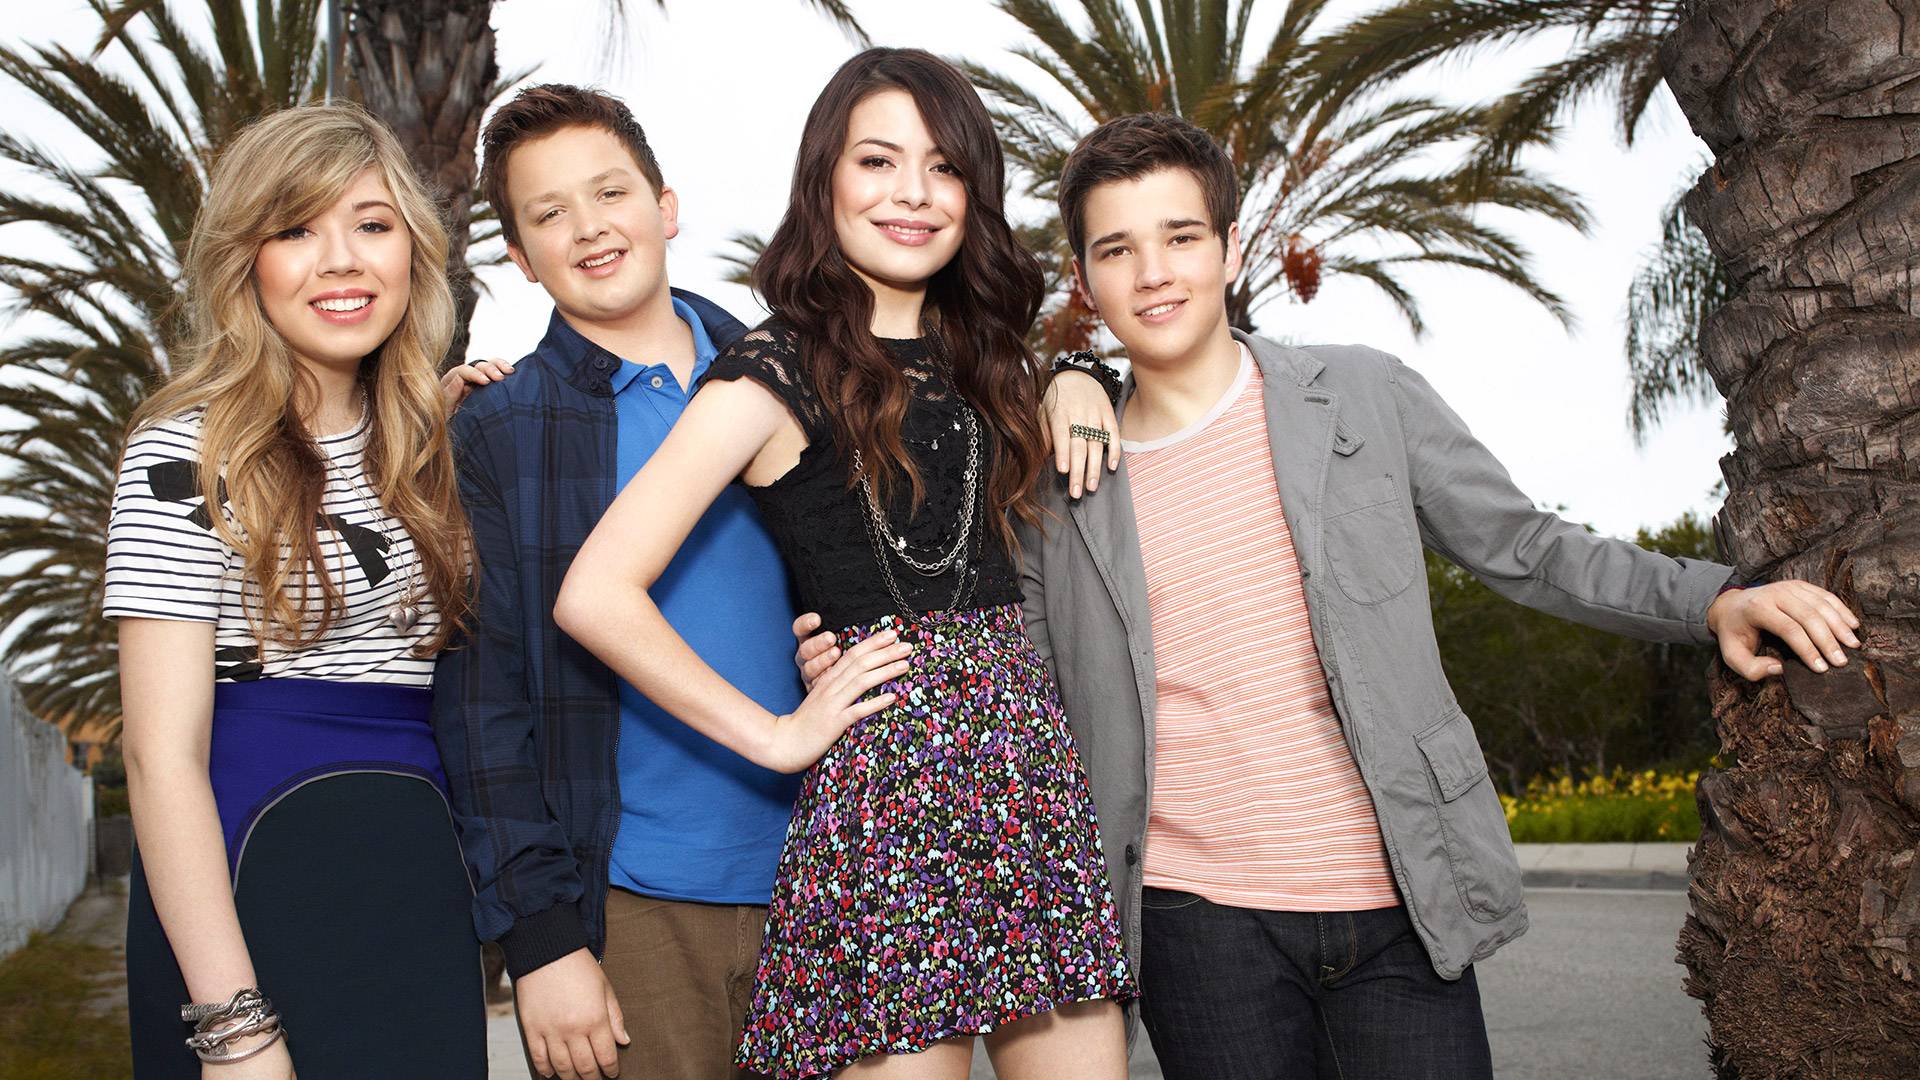 ICarly Wallpapers - Wallpaper Cave Sam From Icarly 2014.